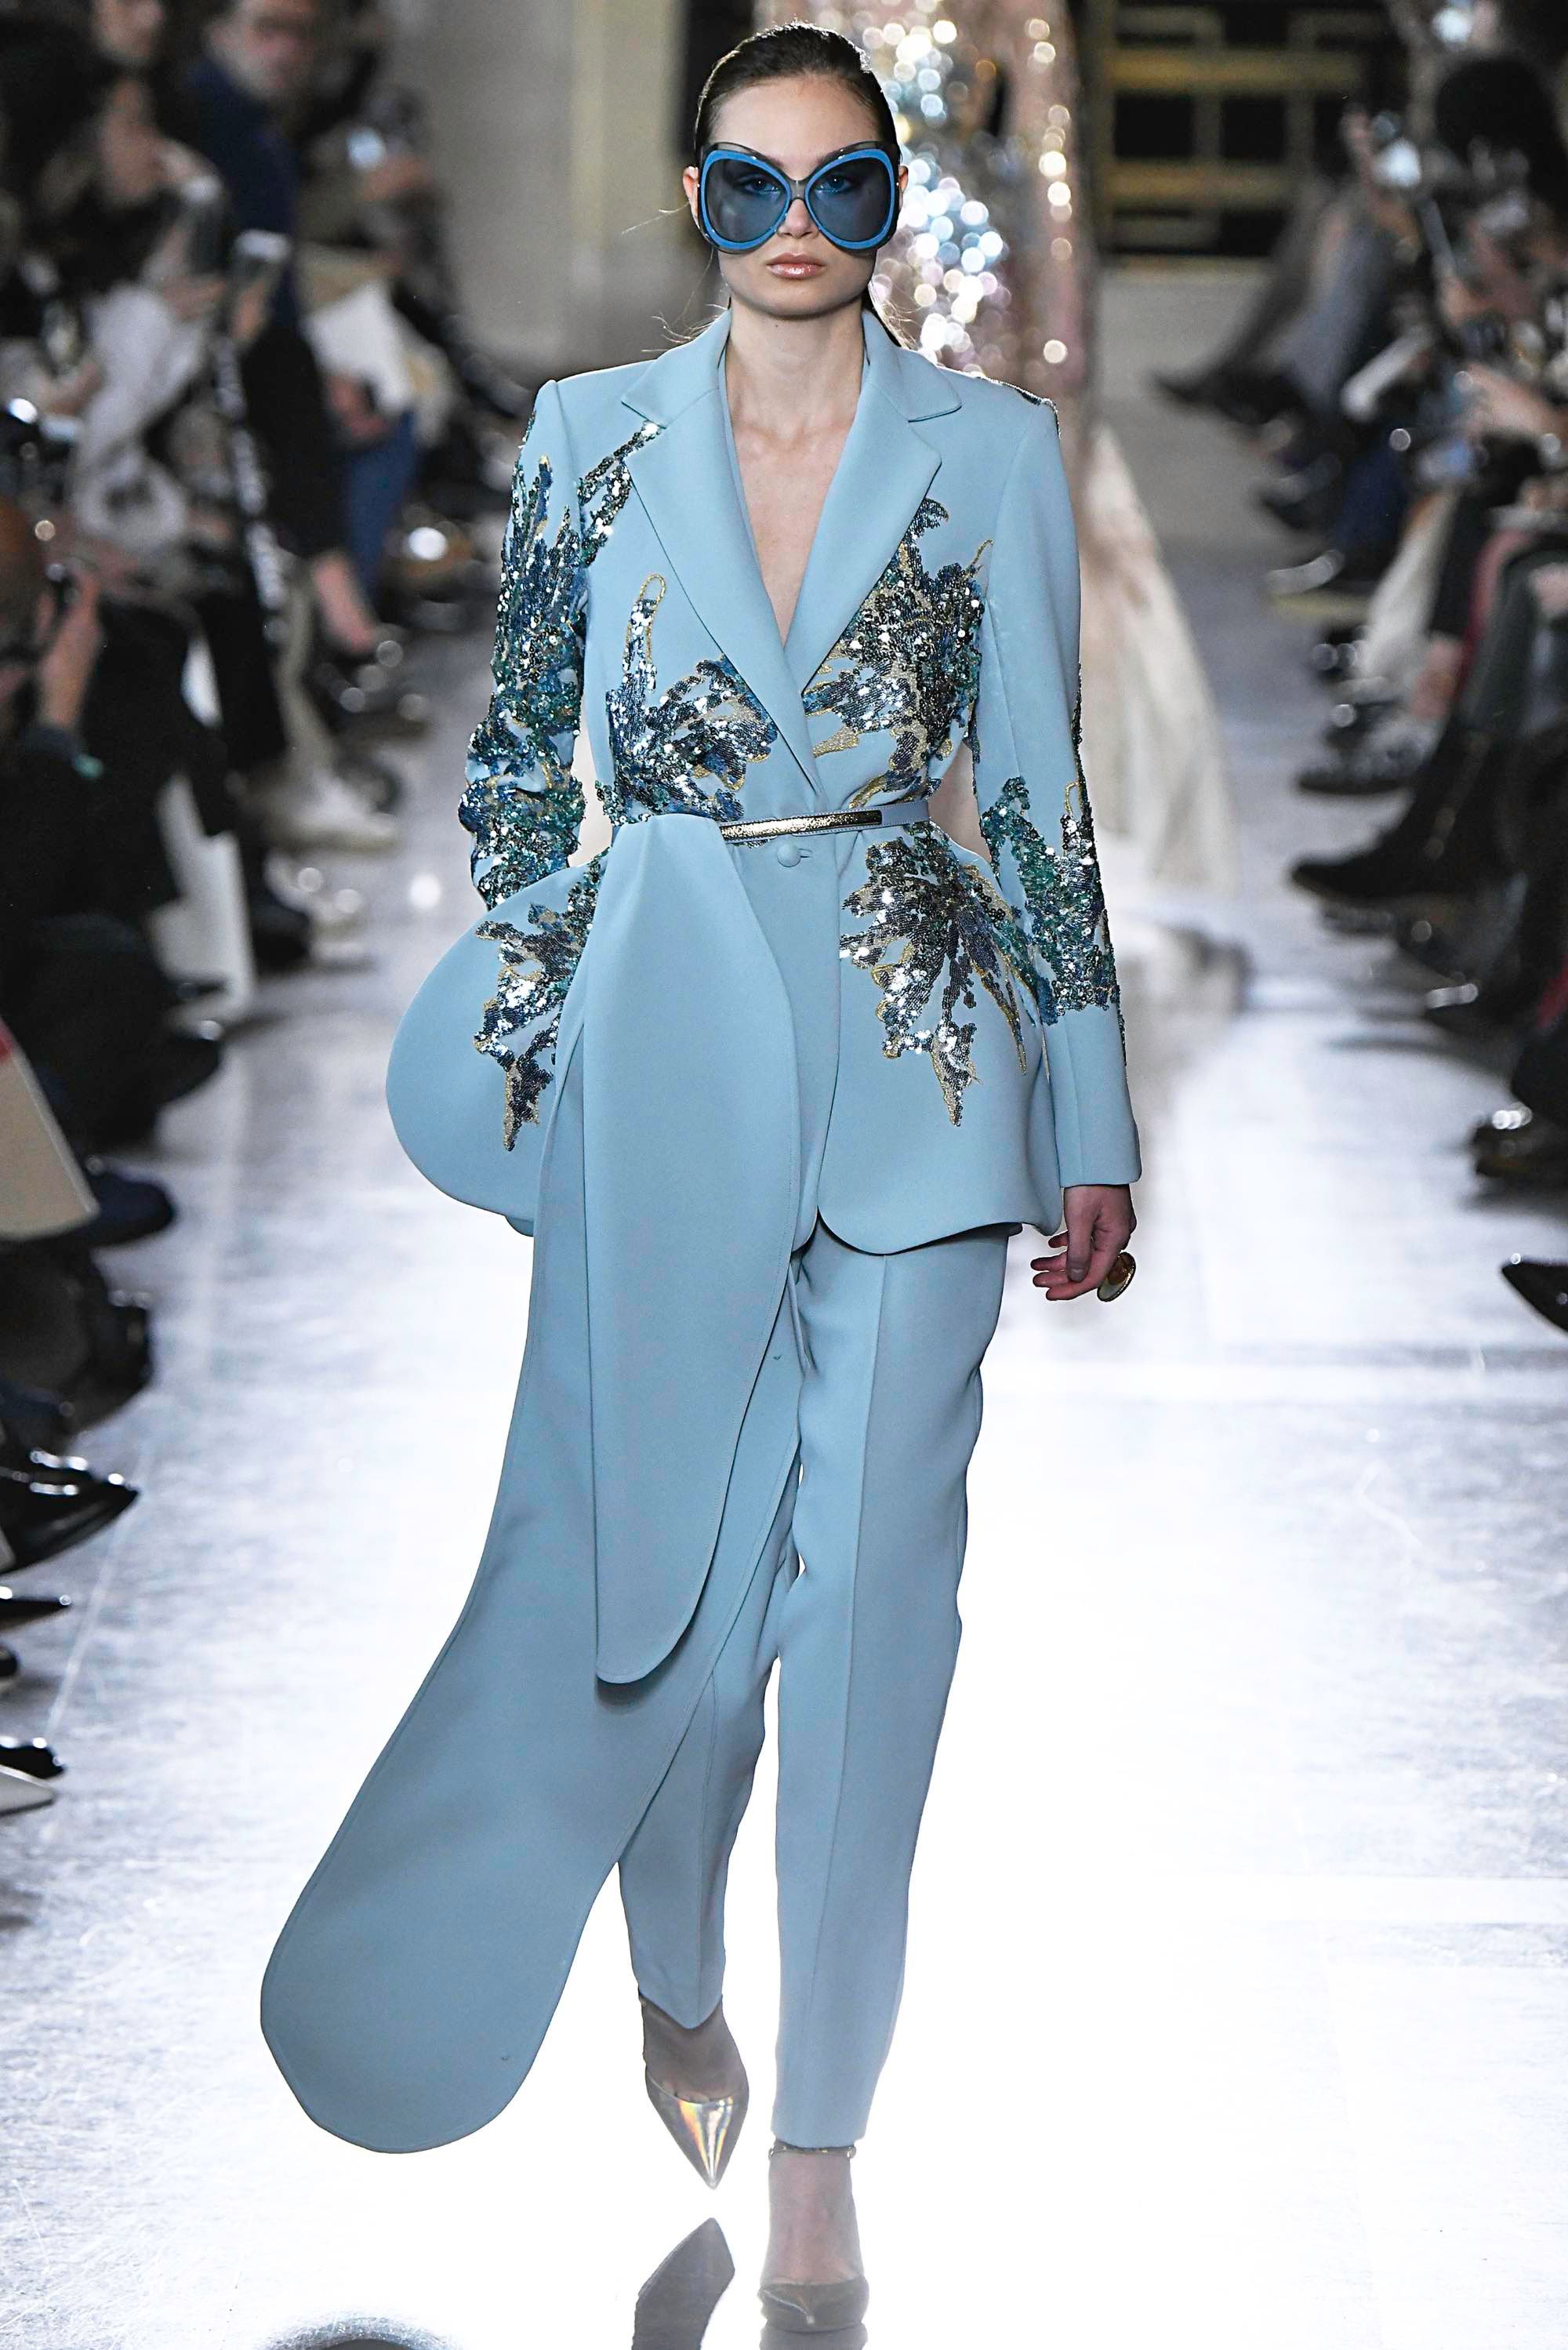 Elie Saab S/S19 couture #5 - Tagwalk: The Fashion Search Engine